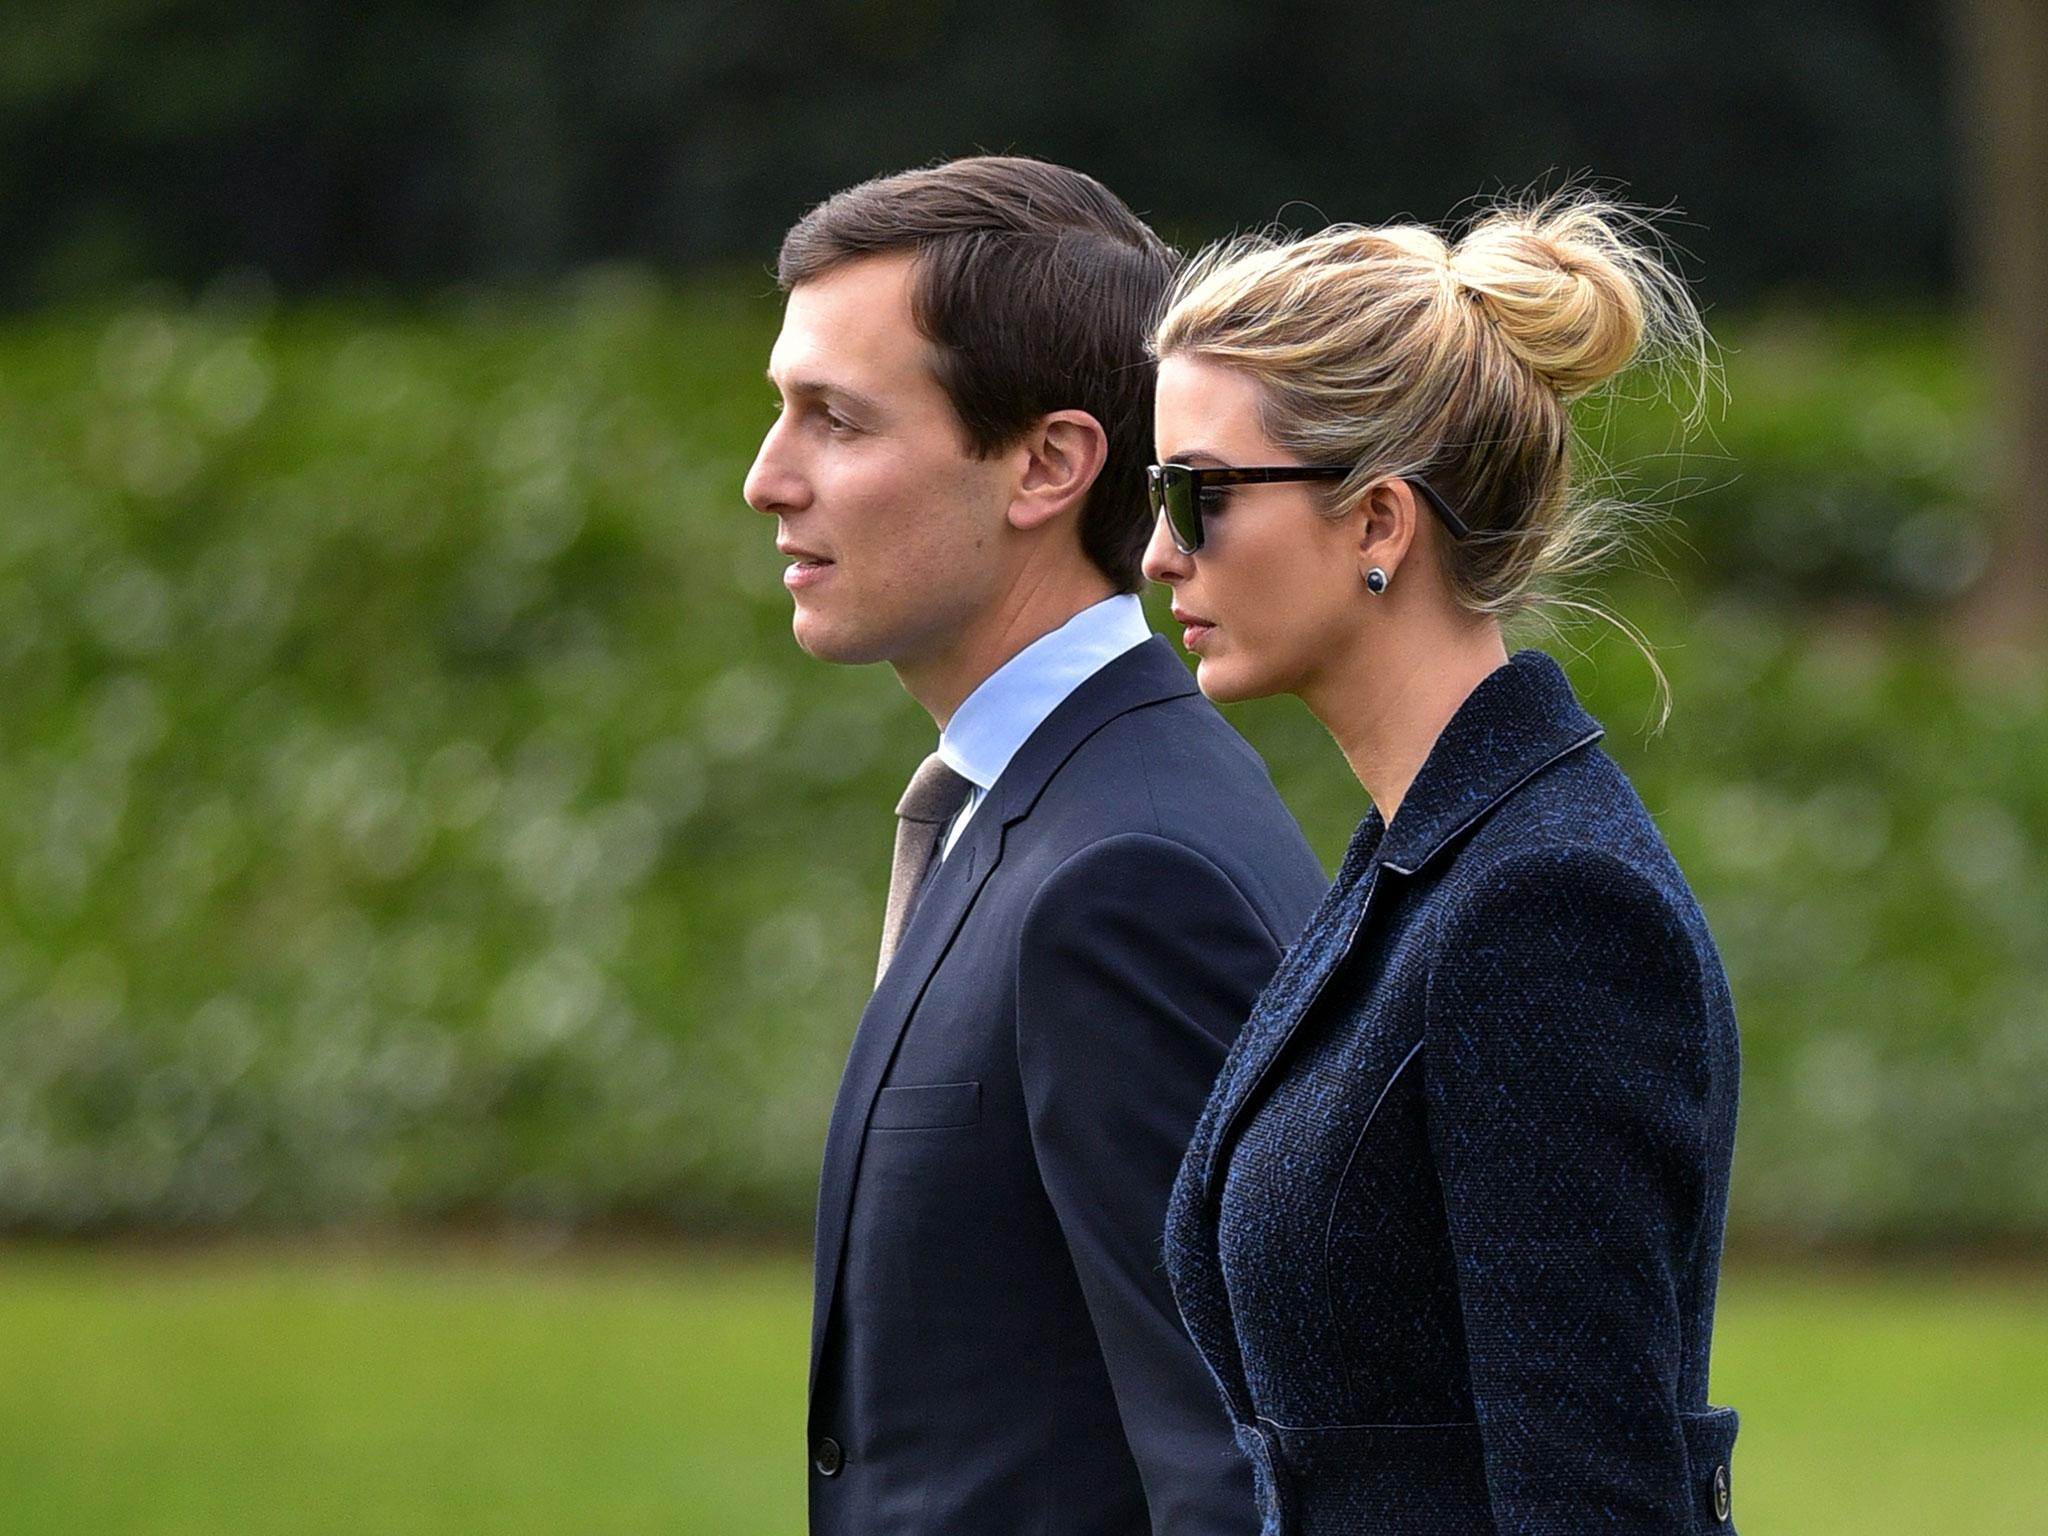 Mr Kushner will be closest person to the President to be grilled on Russia ties